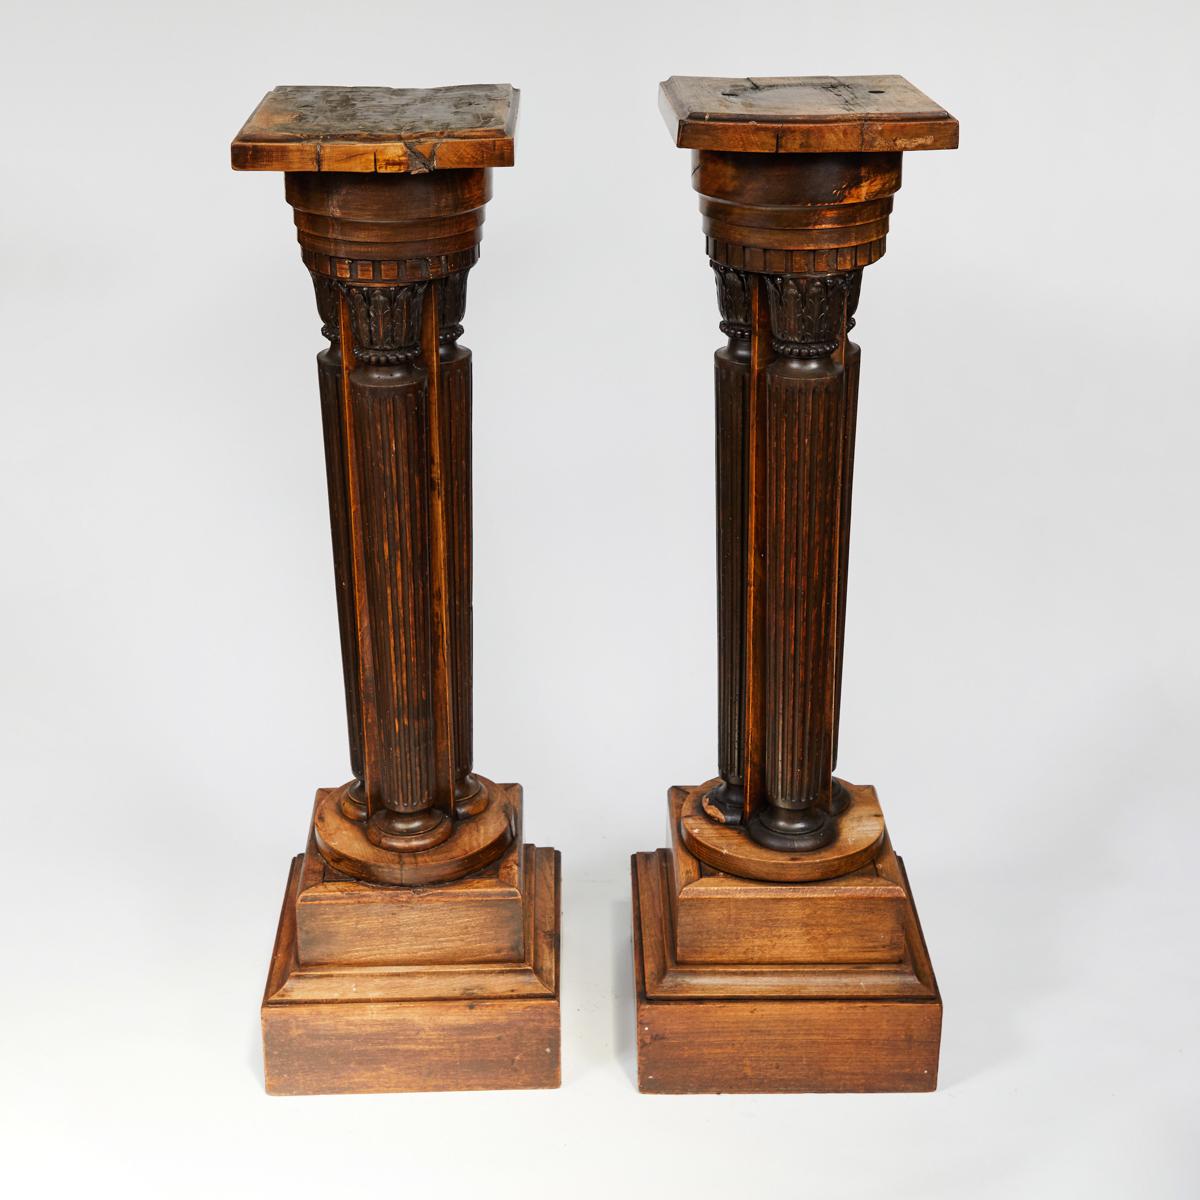 Carved Late 19th Century French Pair of Classical Pedestal Stand Plinths